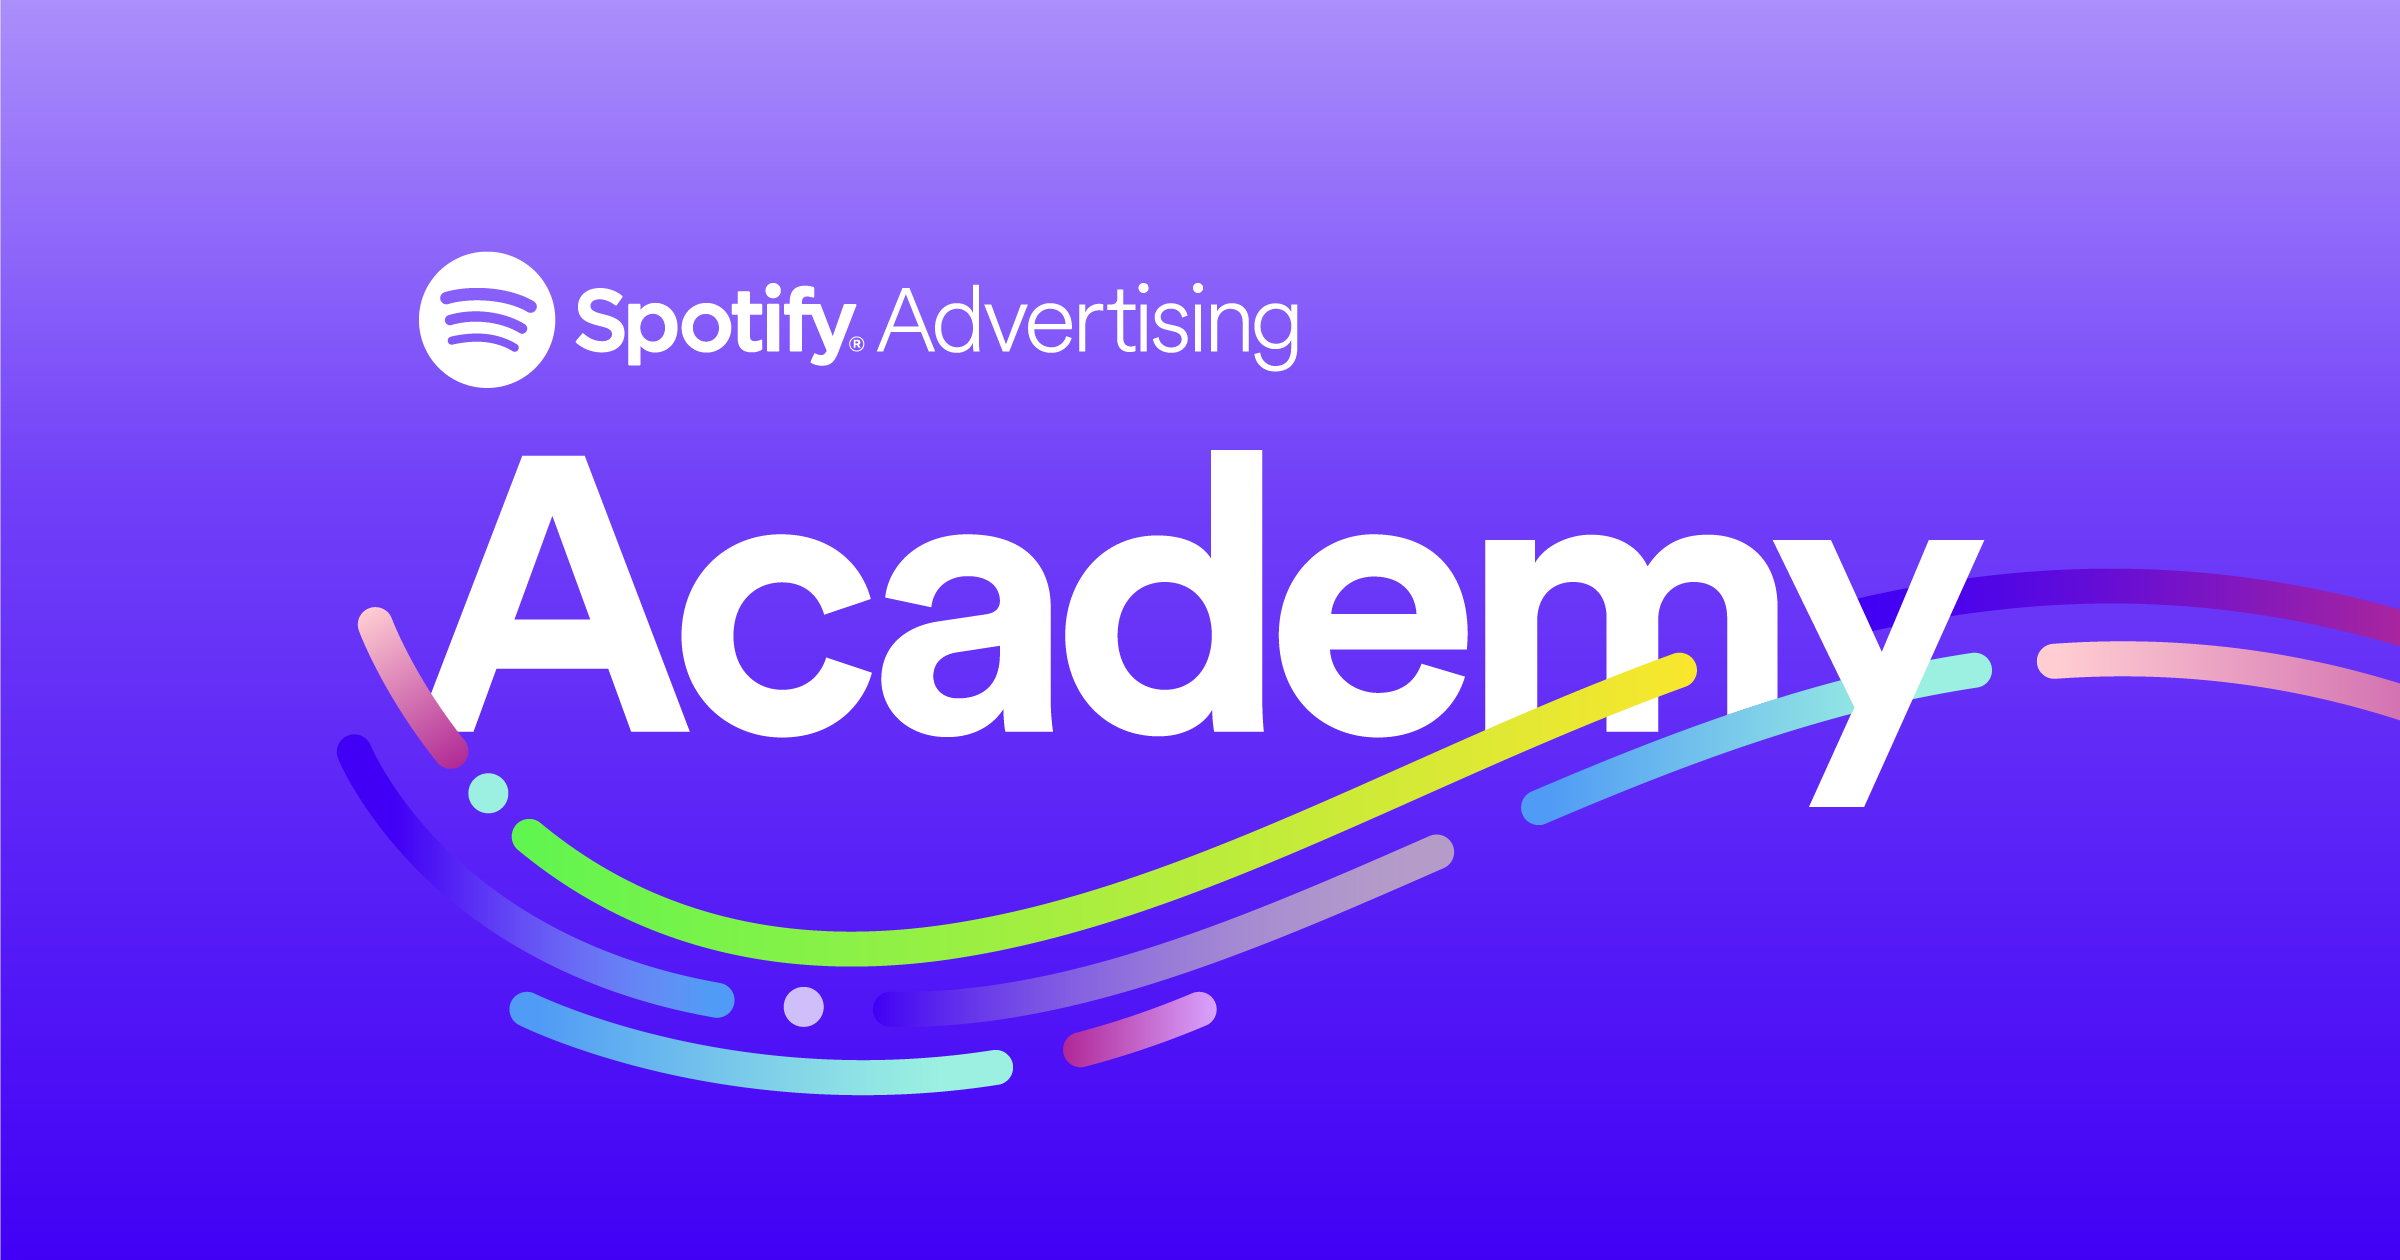 The Spotify Advertising Academy: Get Certified in Spotify Ads